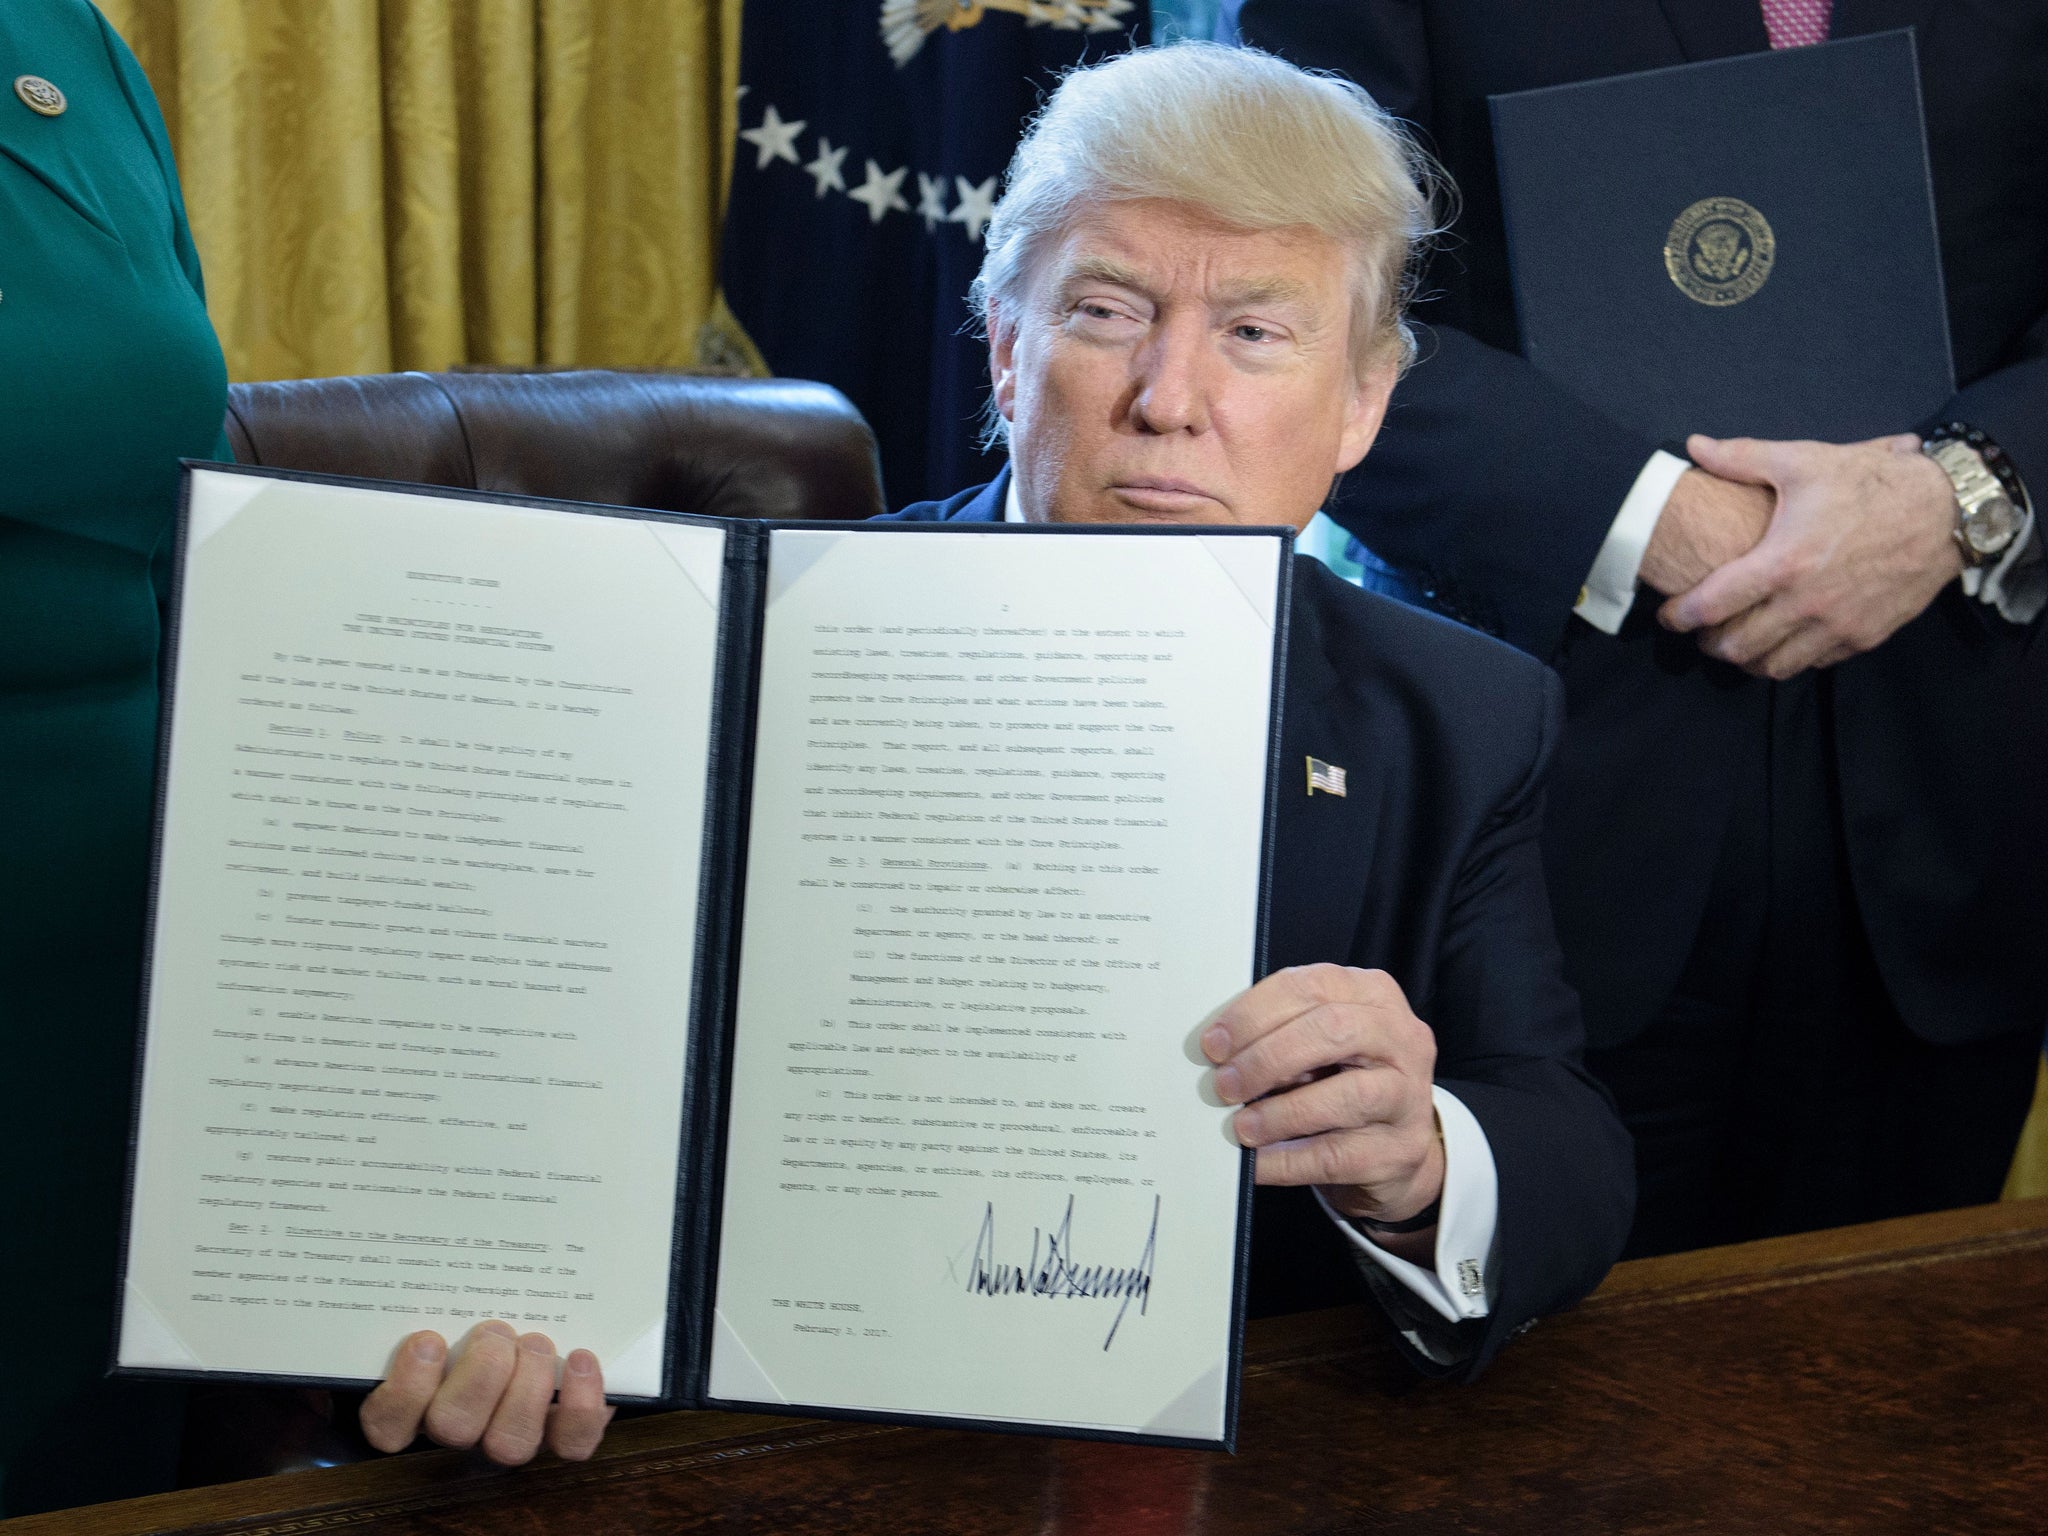 Donald Trump's first executive order could mean millions now face deportation